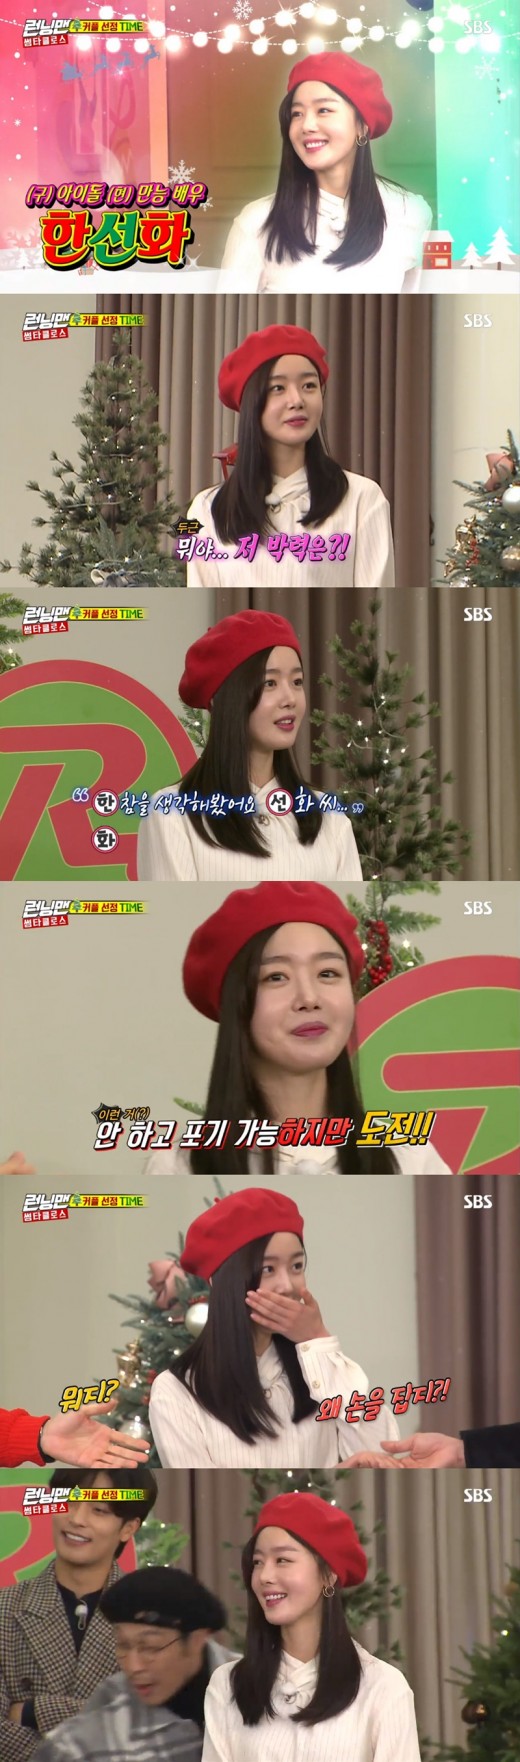 <p> Actress Han Sunhwa with a long example of a function appeared in the man presence unleash.</p><p>The last 23 days broadcast SBS TV ‘Running Man’Christmas anniversary ‘thumb Satan Claus’ special unfolds, Han Sunhwa as a guest starring.</p><p>Han Sunhwa is a couple chases this as much as even peek-a-Boo bear went. In this midst of this tour and the couple became, but eventually the night or back to even peek-a-Boo to my Princess and first appeared from the chaos that engulfed in.</p><p>Han Sunhwa is a mint one with open as a partner this popular water taxi to the guest, but with divergence time got. The sudden situation was, but this light of the mind to hold on to the ‘popular’ name the challenge. Confident the to this was Han Sunhwa is the last letter in beep clean and MC Yoo Jae Suk to shoot archery or just take a laugh.</p><p>Therefore, the Solo became Han Sunhwa is again paired Peek-A-Boo bear went, remaining a partner of Yoo Jae Suk for the taxi to yourself you the To New even peek-a-Boo to ask wits to extraordinary Artistic sensation to me.</p><p>So long time art appeared in the beginning a strong impact to the left Han Sunhwa next week in earnest and unfolds in the couples race on any active show but there are many expectations.</p><p>Meanwhile, Han Sunhwa is coming 29, 12 at night, to be broadcast in tvN short drama ‘drama stage 2019 - Good - by my life insurance’ - find out.</p>